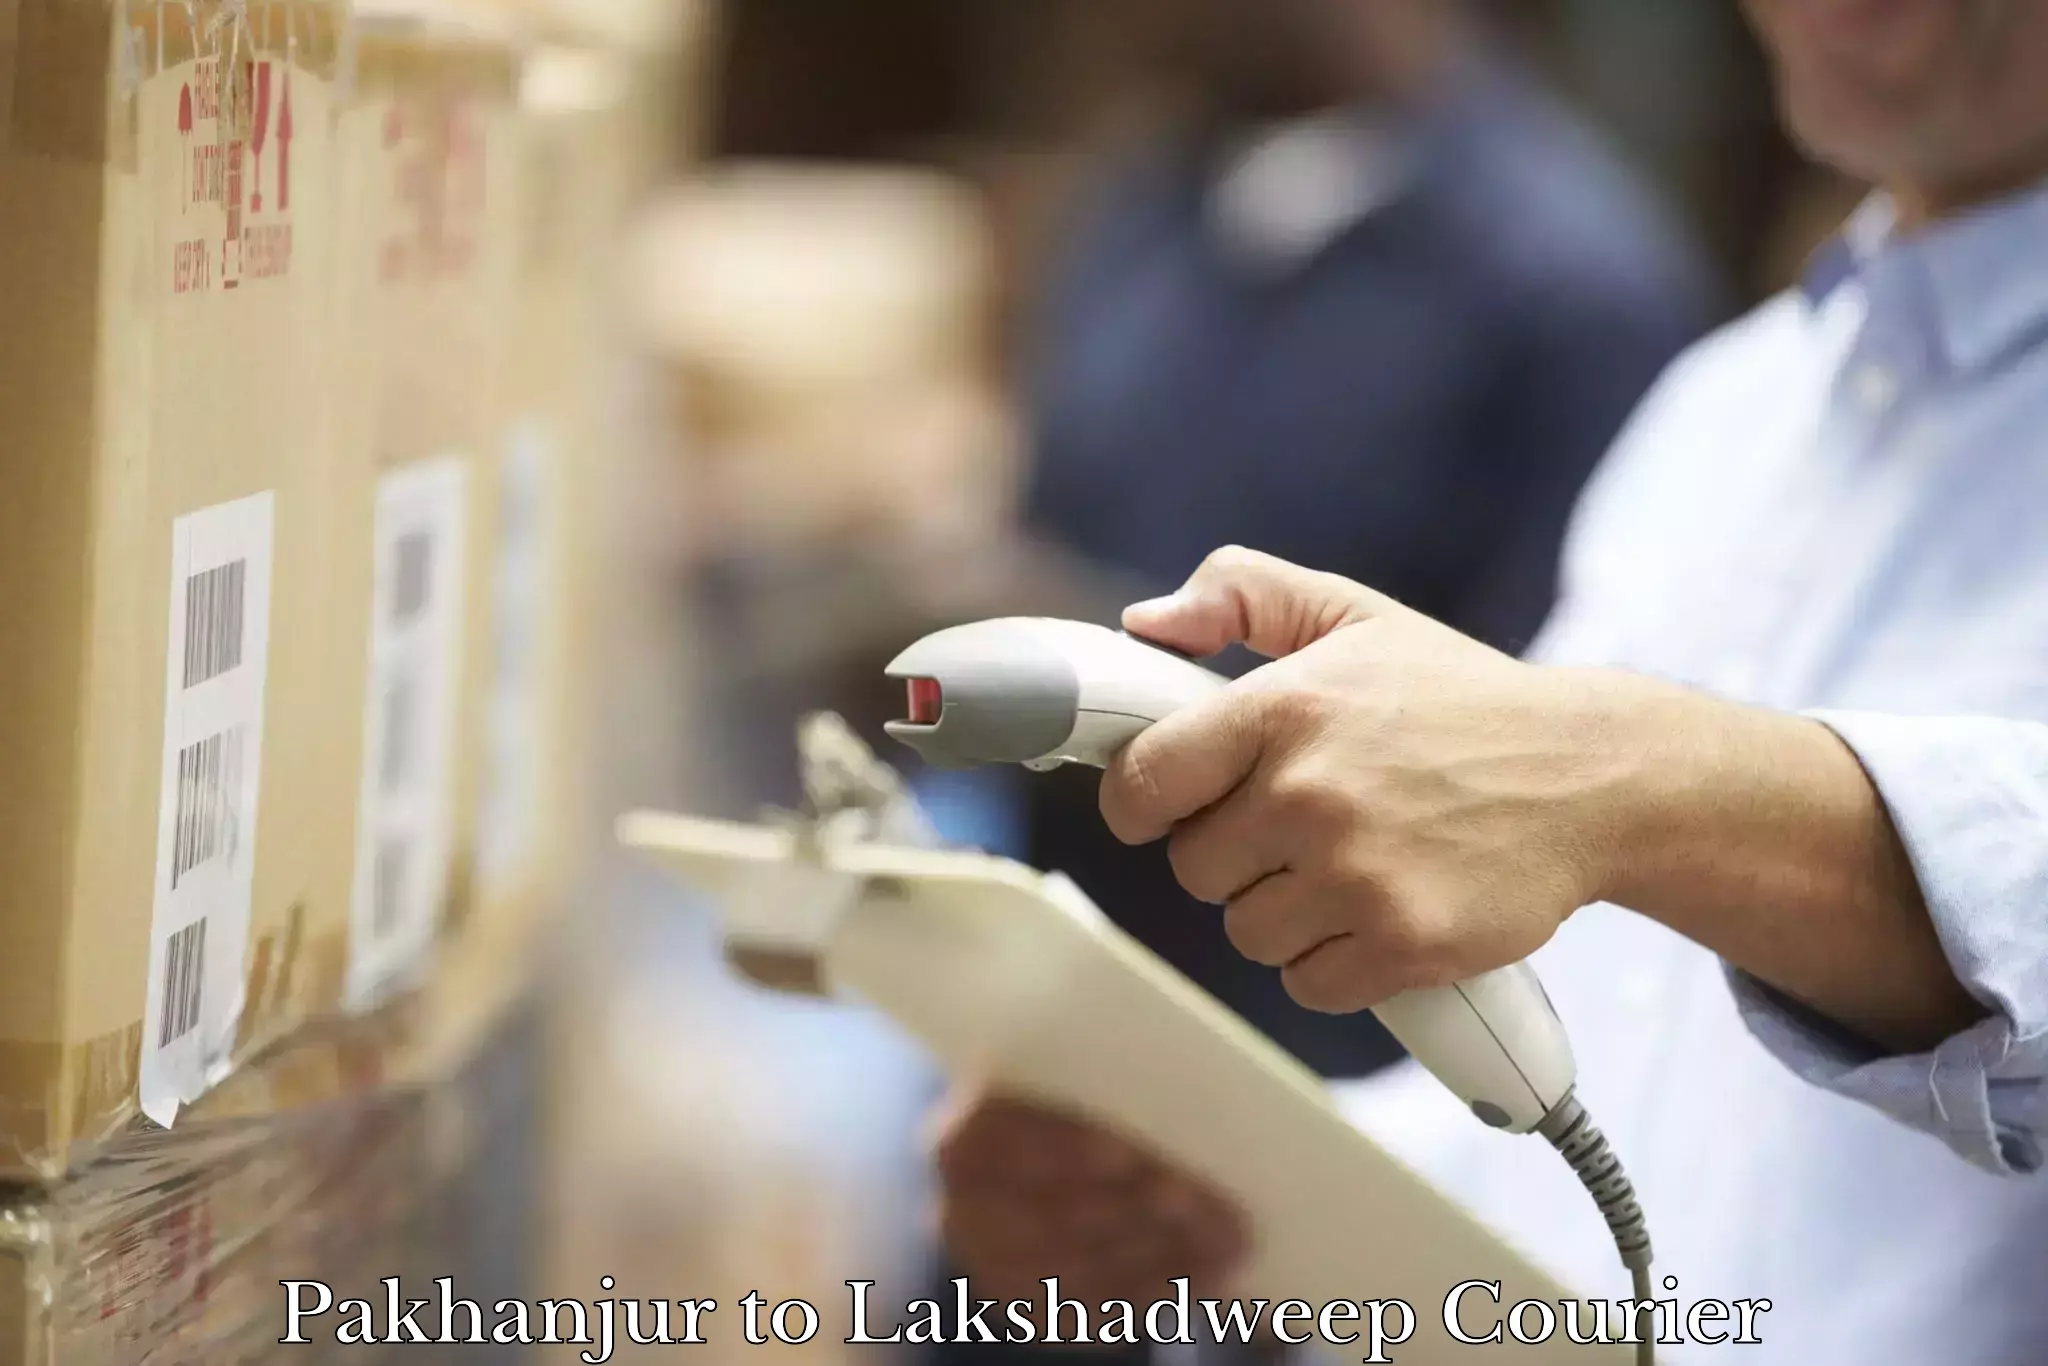 User-friendly delivery service Pakhanjur to Lakshadweep